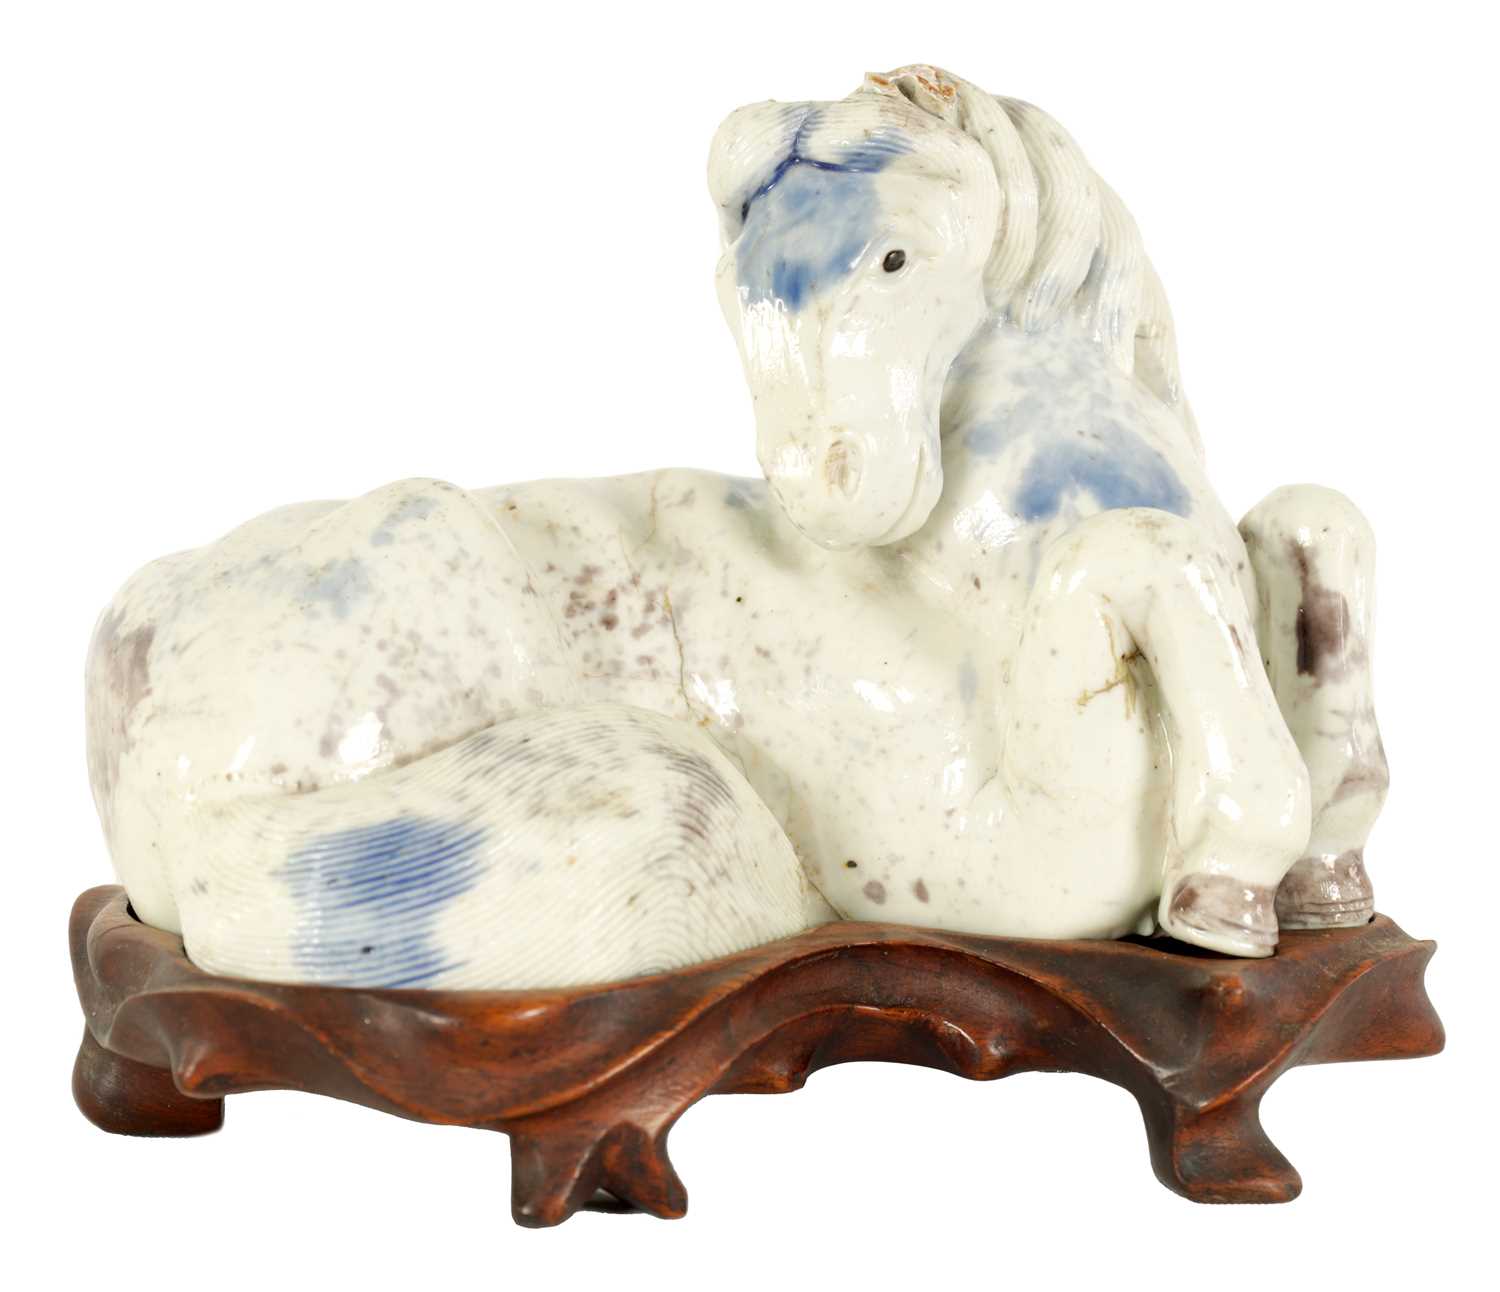 Lot 69 - A 19TH CENTURY CHINESE POTTERY WHITE AND BLUE SPASH GLAZED SCULPTURE OF A RECUMBENT HORSE